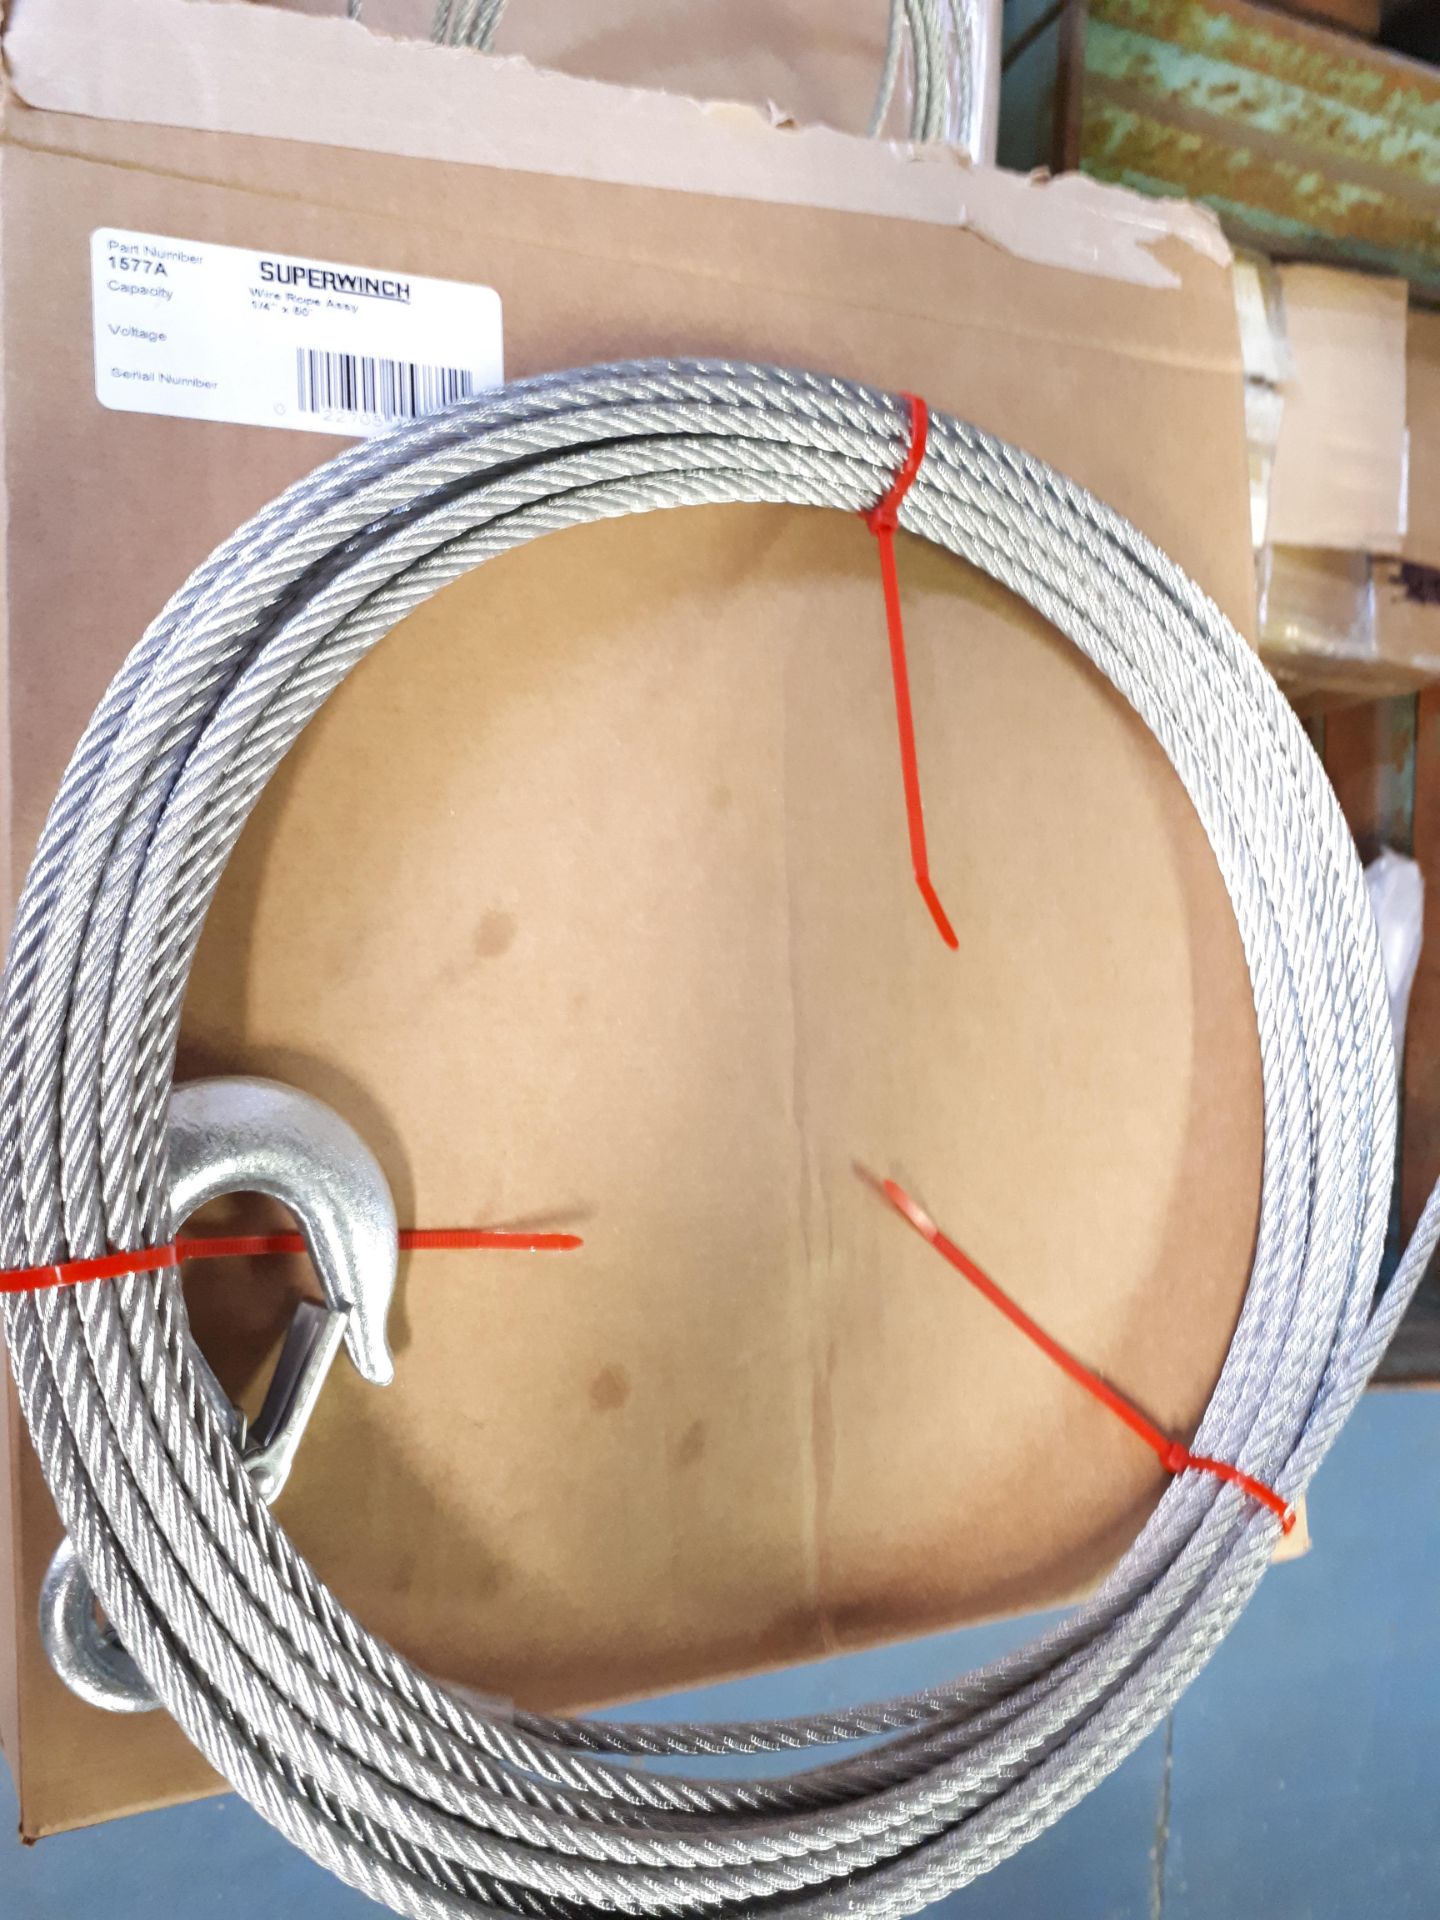 (60) Superwinch wire rope assembly, Part no's. 1577A & 1511F - Image 3 of 3